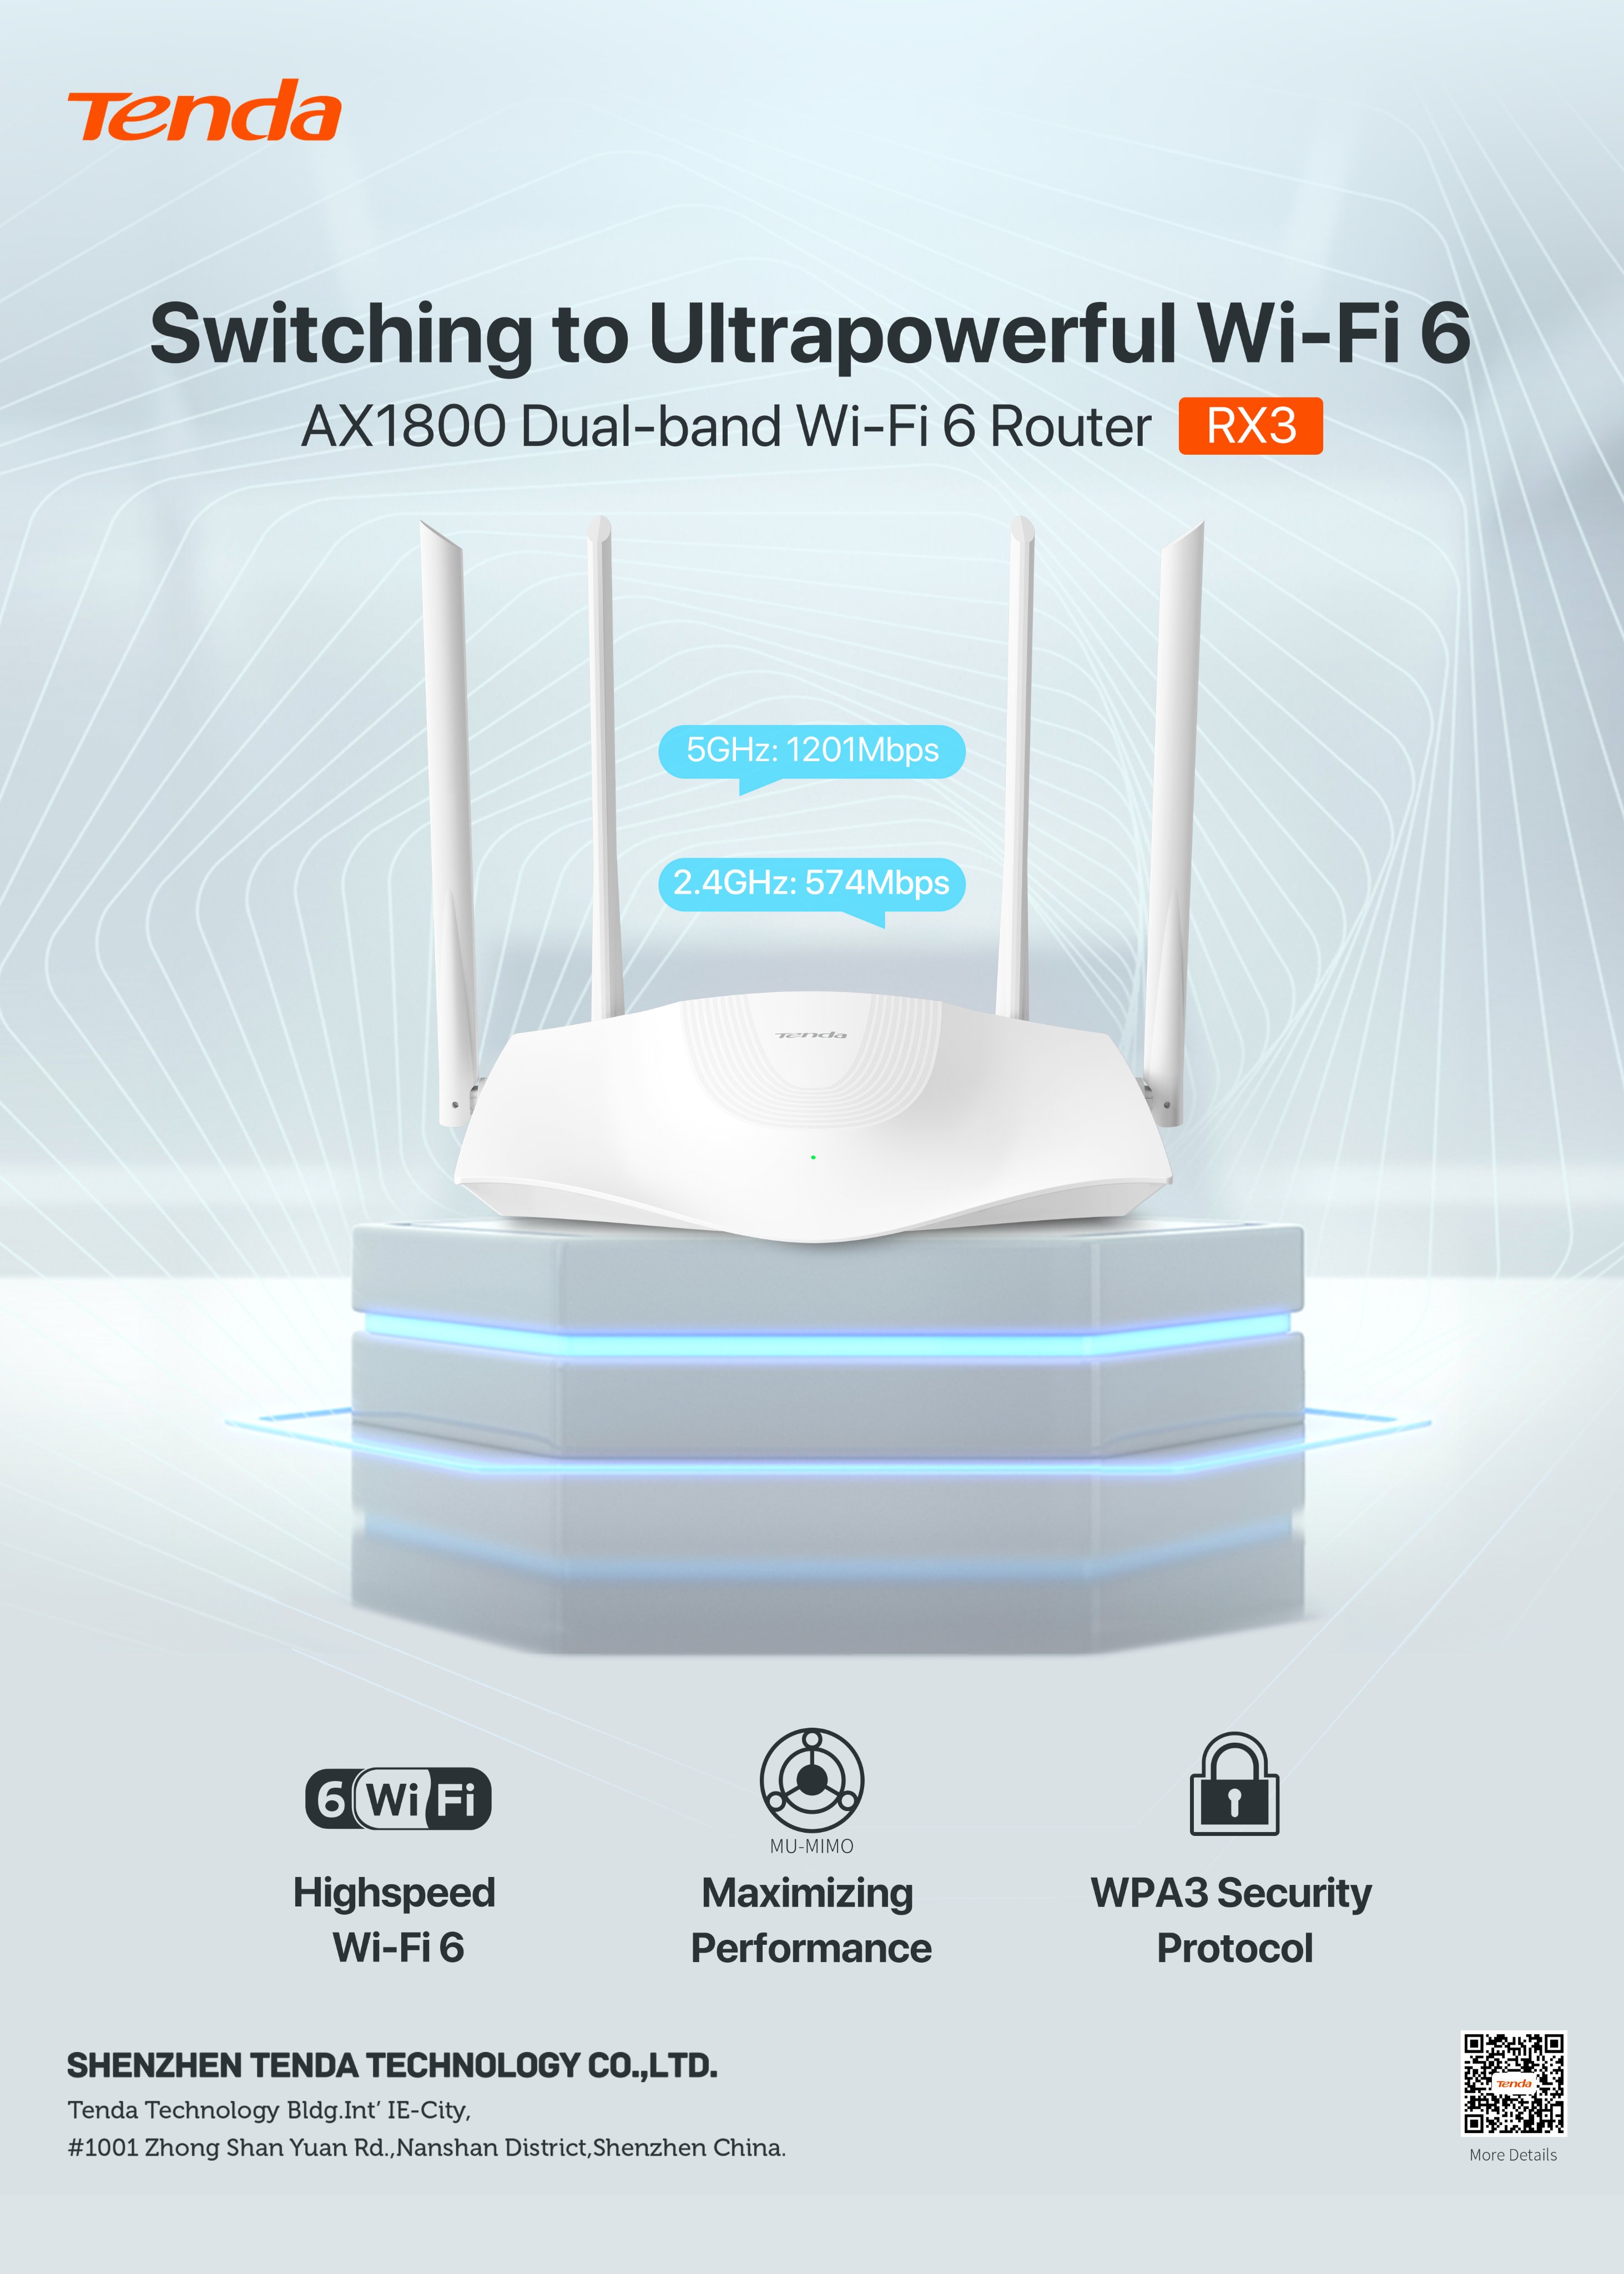 Tenda on X: "Less wireless latency. More connected capacity. Faster Wi-Fi  speeds. That's the power of Tenda RX3 AX1800 Wi-Fi 6 Router. Learn more:  https://t.co/IkEDgwDDiH https://t.co/kT5729ZXFk" / X